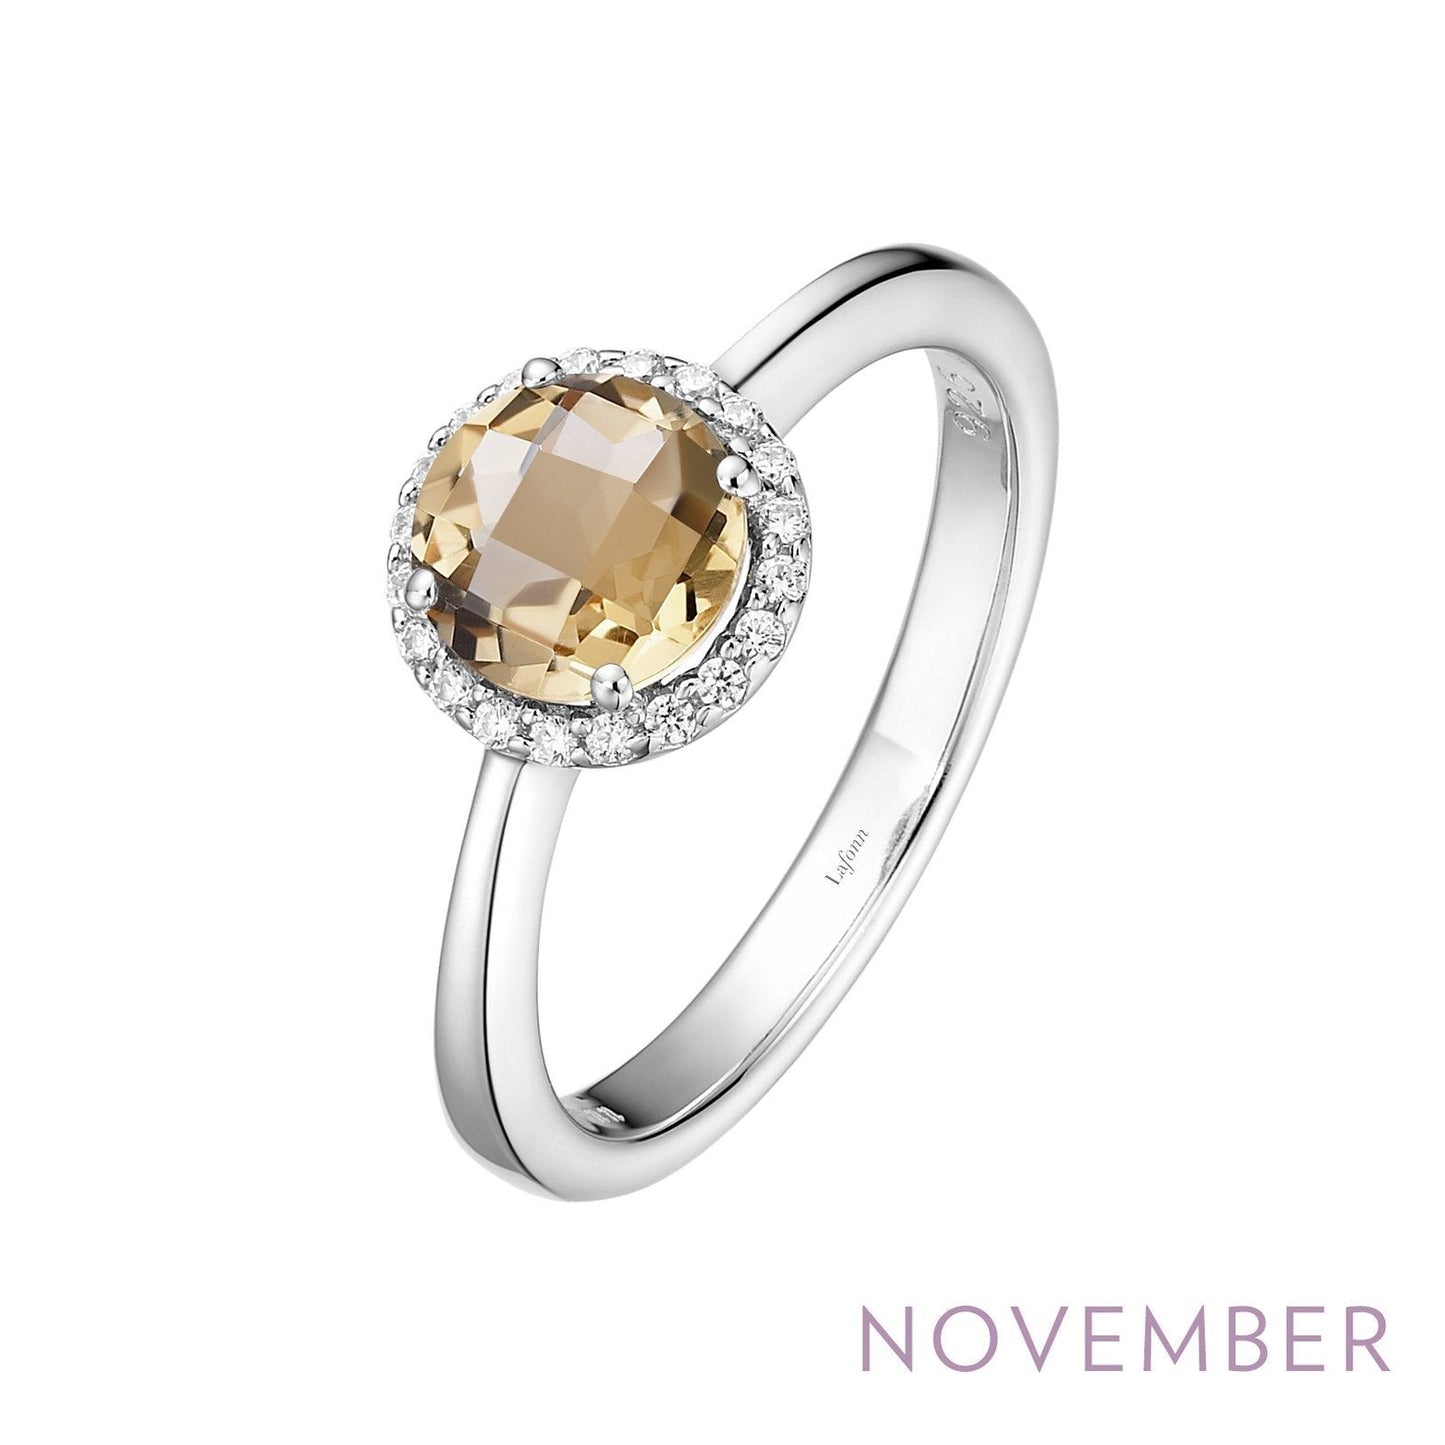 Load image into Gallery viewer, Lafonn November Birthstone Ring NOVEMBER RINGS Size 7 Platinum Appx CTW: 1.05 cts. Citrine Appx 0.85 cts.  Lassaire simulated diamonds: 0.20 cts. CTS 
